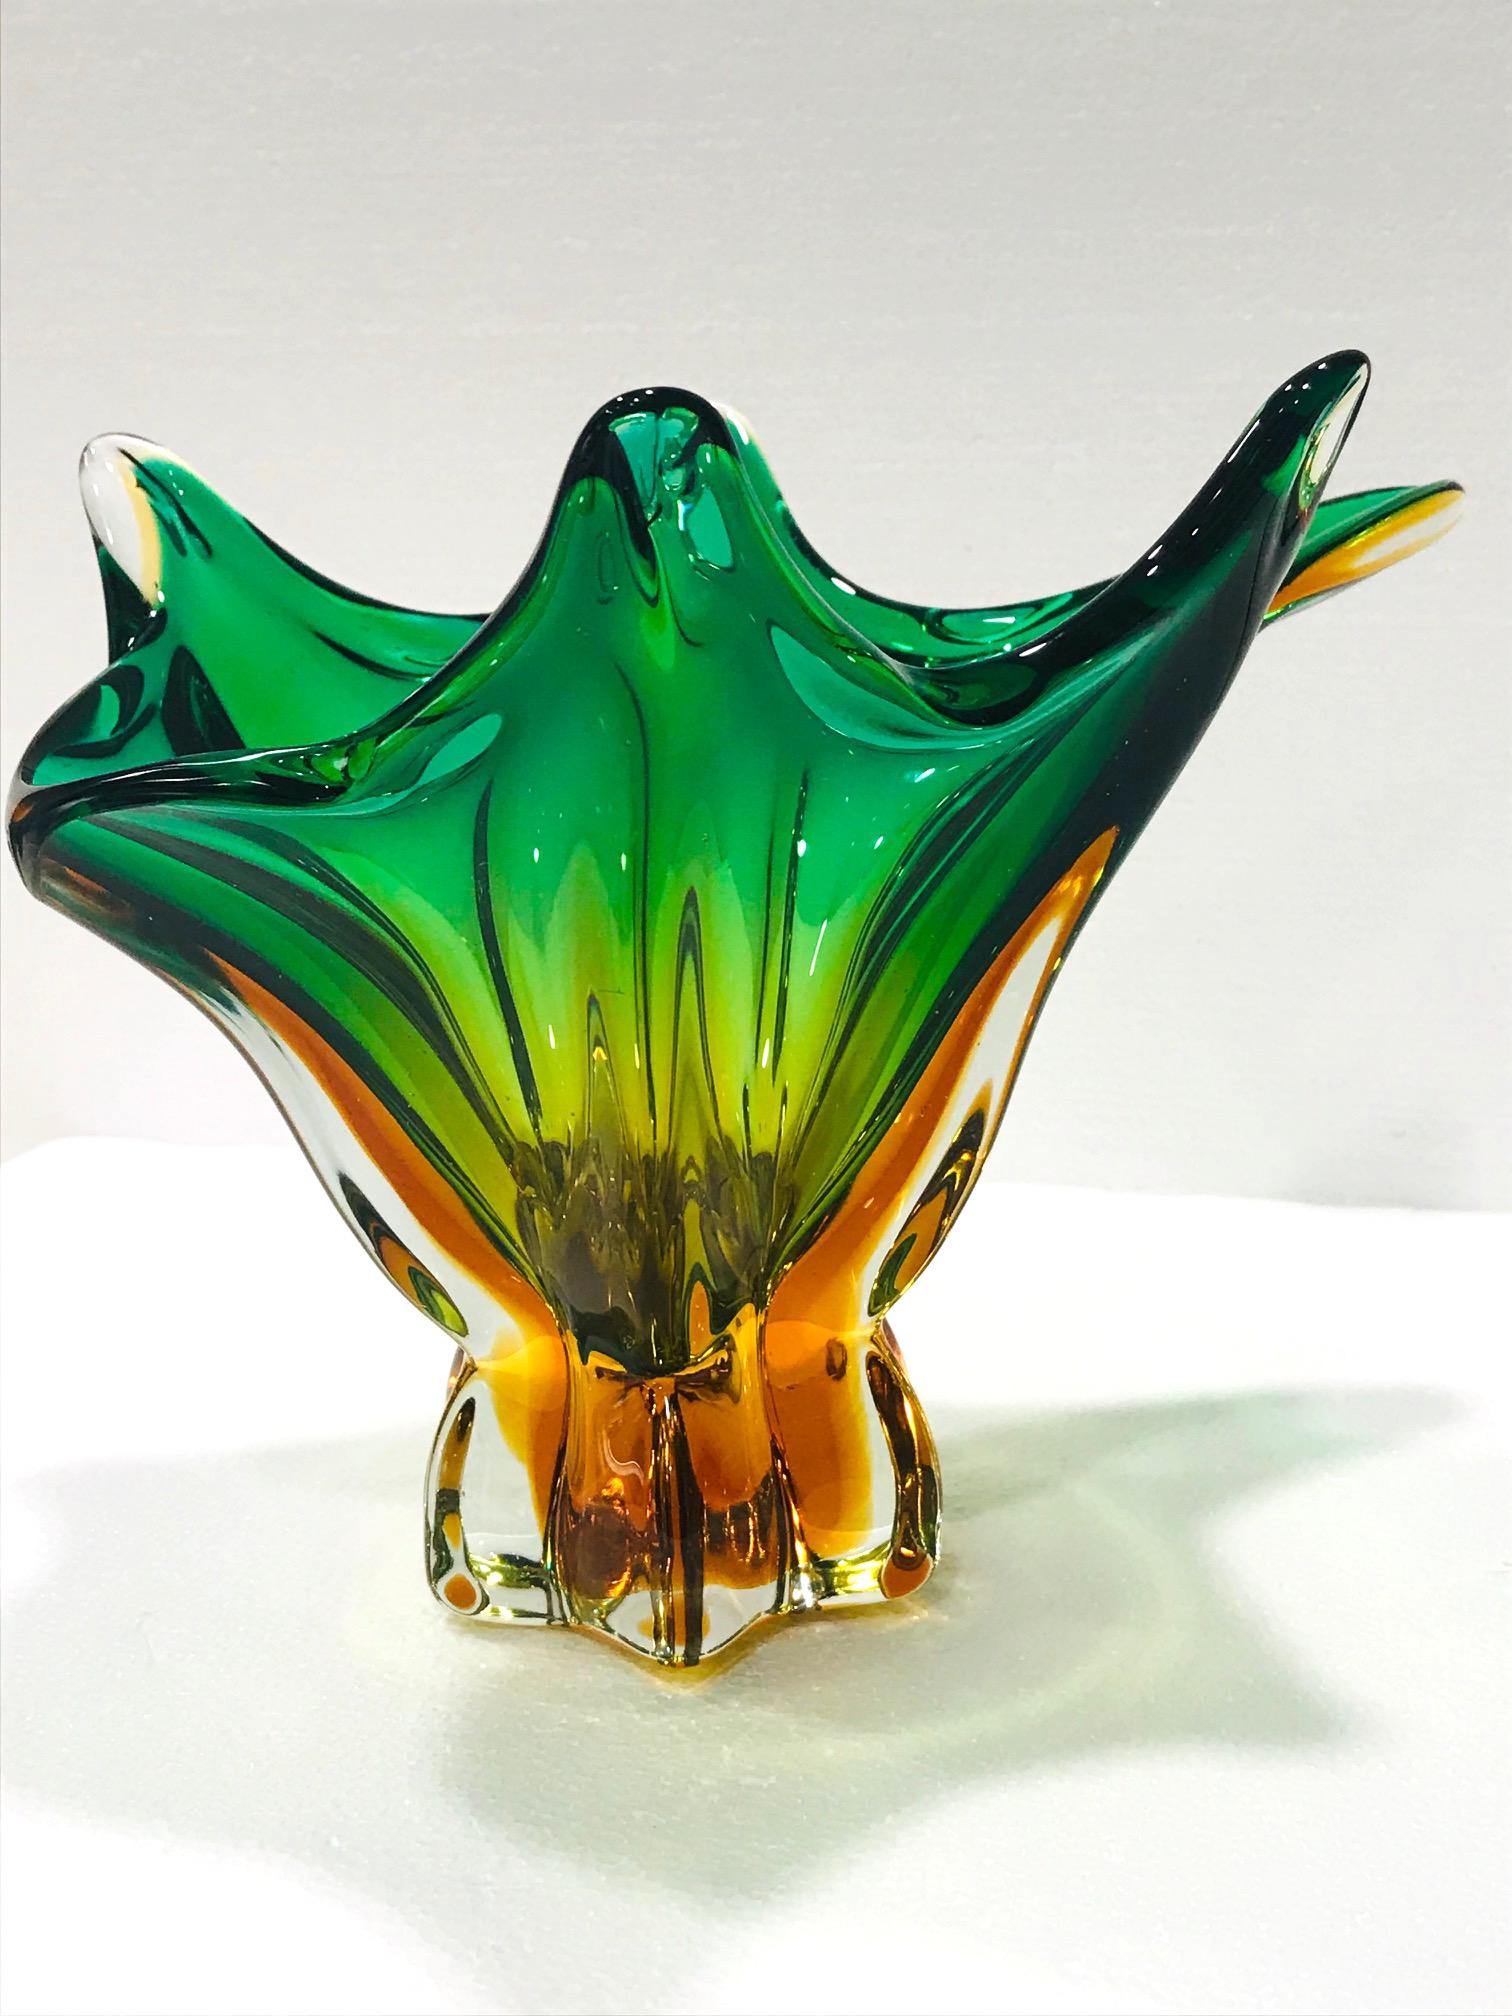 Italian Mid-Century Modern Abstract Murano Glass Vase in Green and Gold, Italy c. 1950s